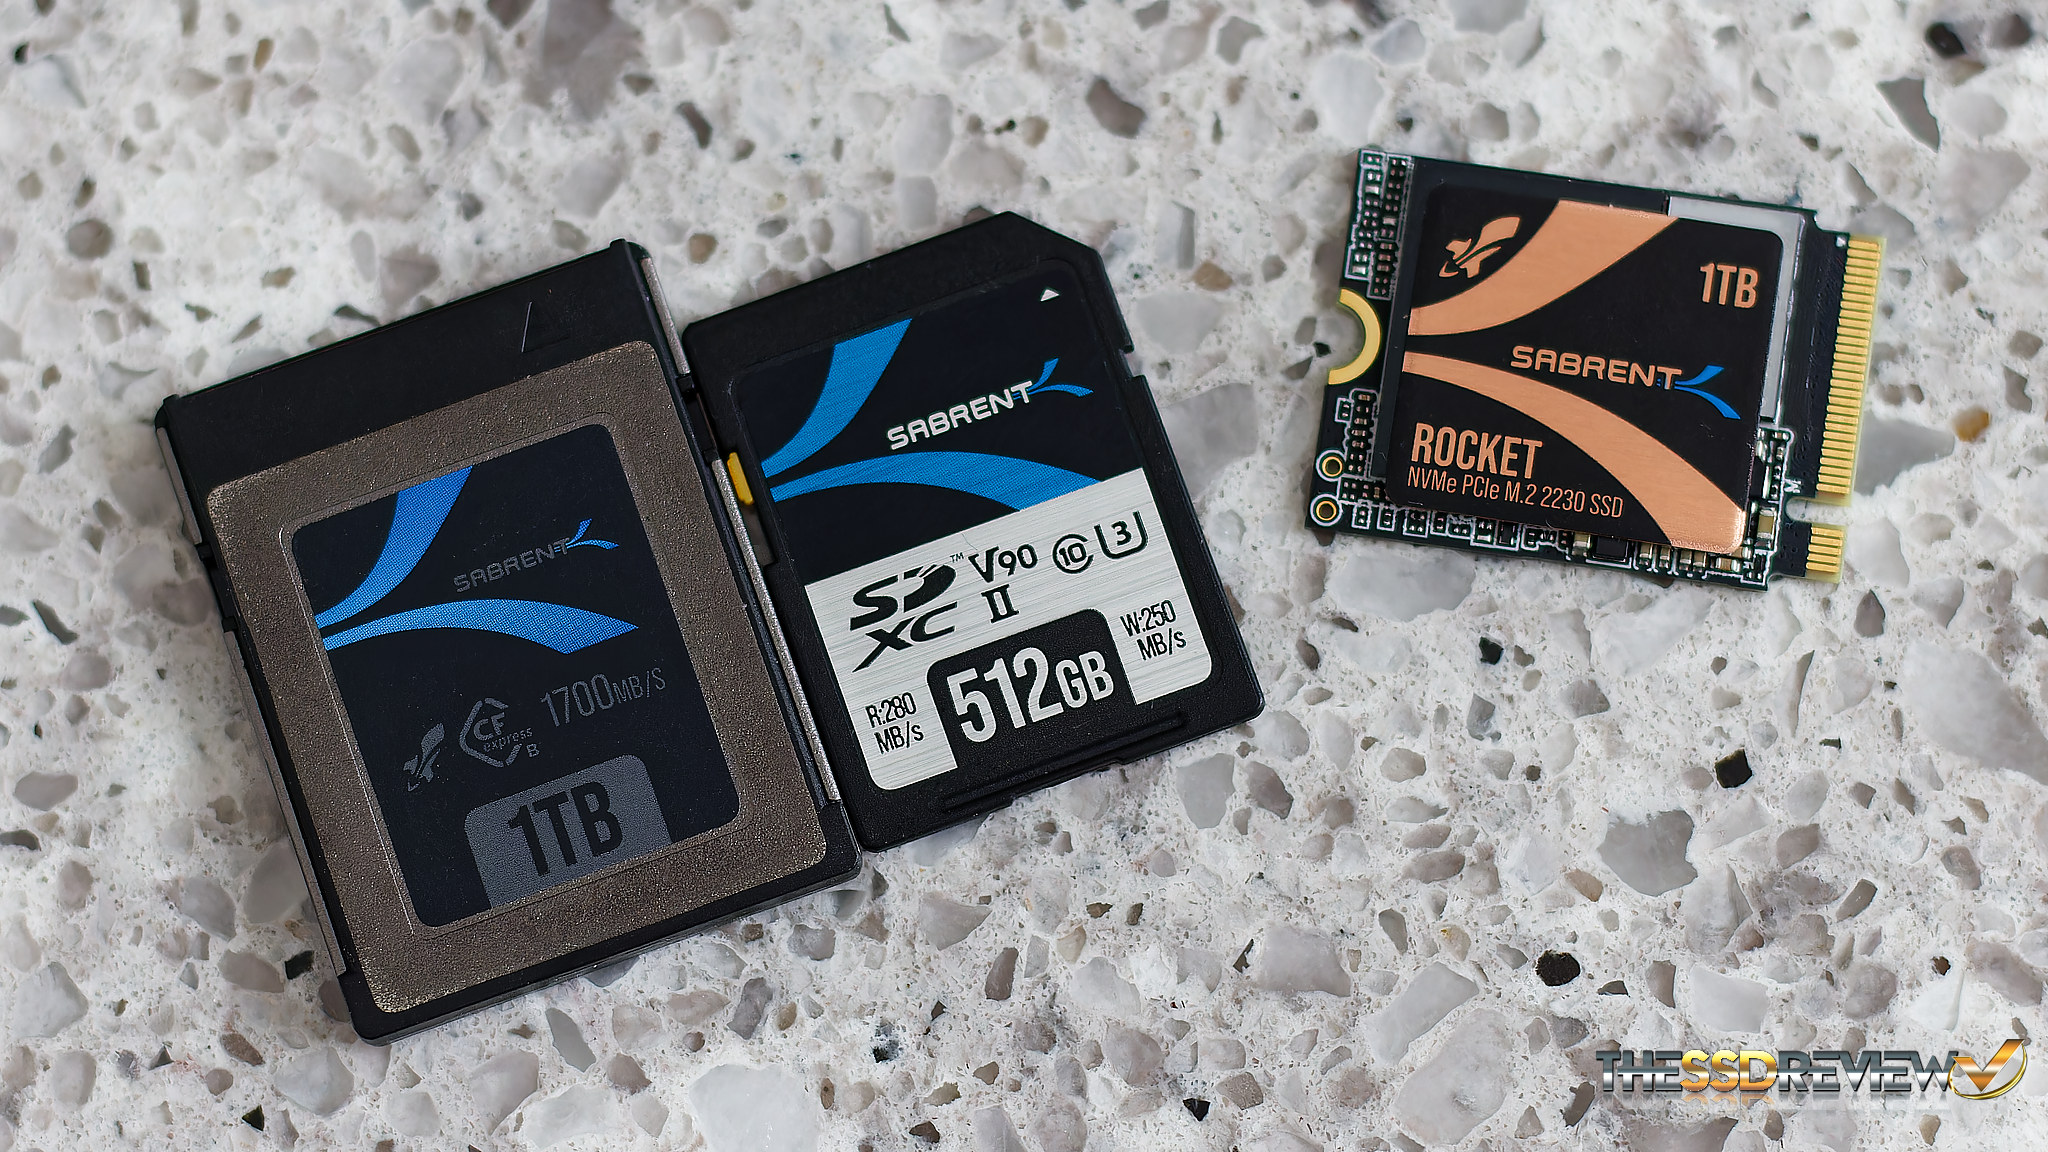 Sabrent Rocket Gen 4 2230 1TB M.2 SSD Review - Is this the